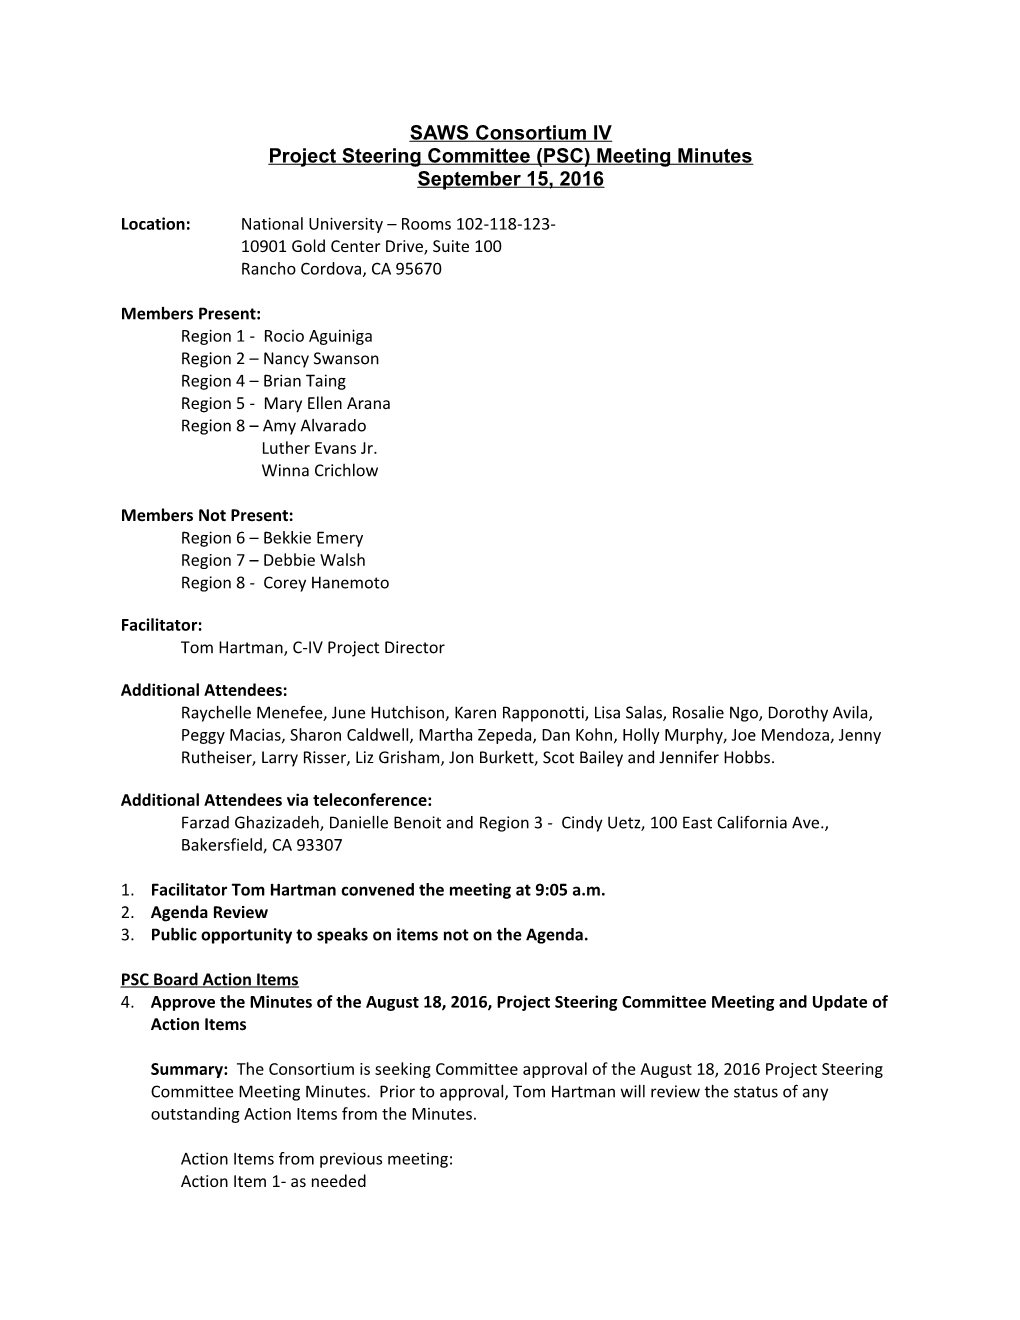 Project Steering Committee (PSC) Meeting Minutes